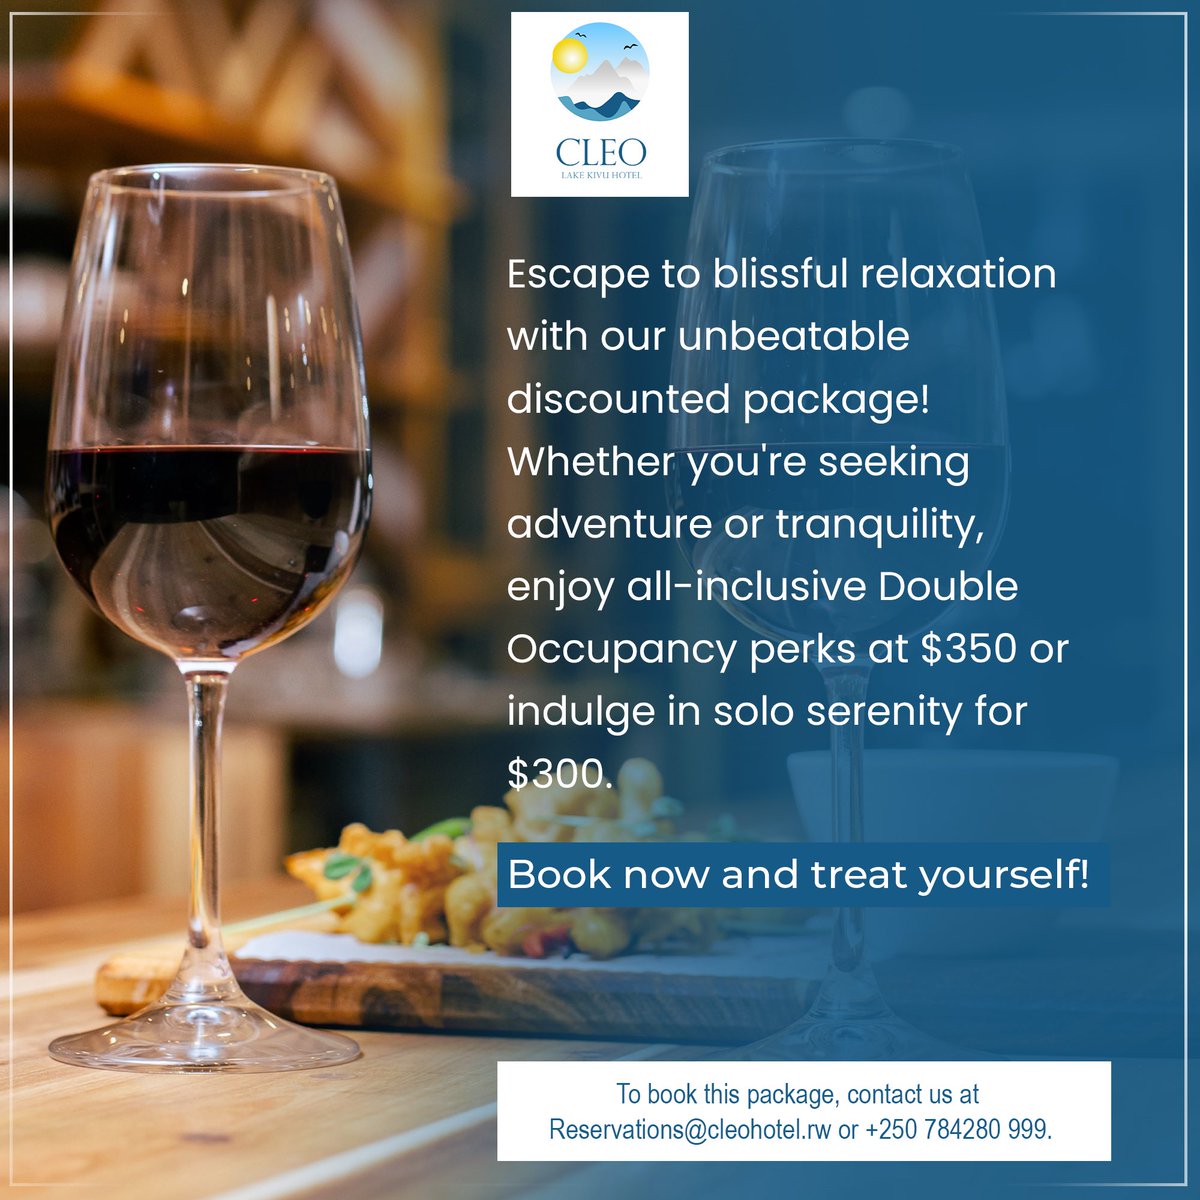 Escape to blissful relaxation with our unbeatable discounted package! Whether you're seeking adventure or tranquility, enjoy all-inclusive Double Occupancy perks at $350 or indulge in solo serenity for $300. Book now and treat yourself!